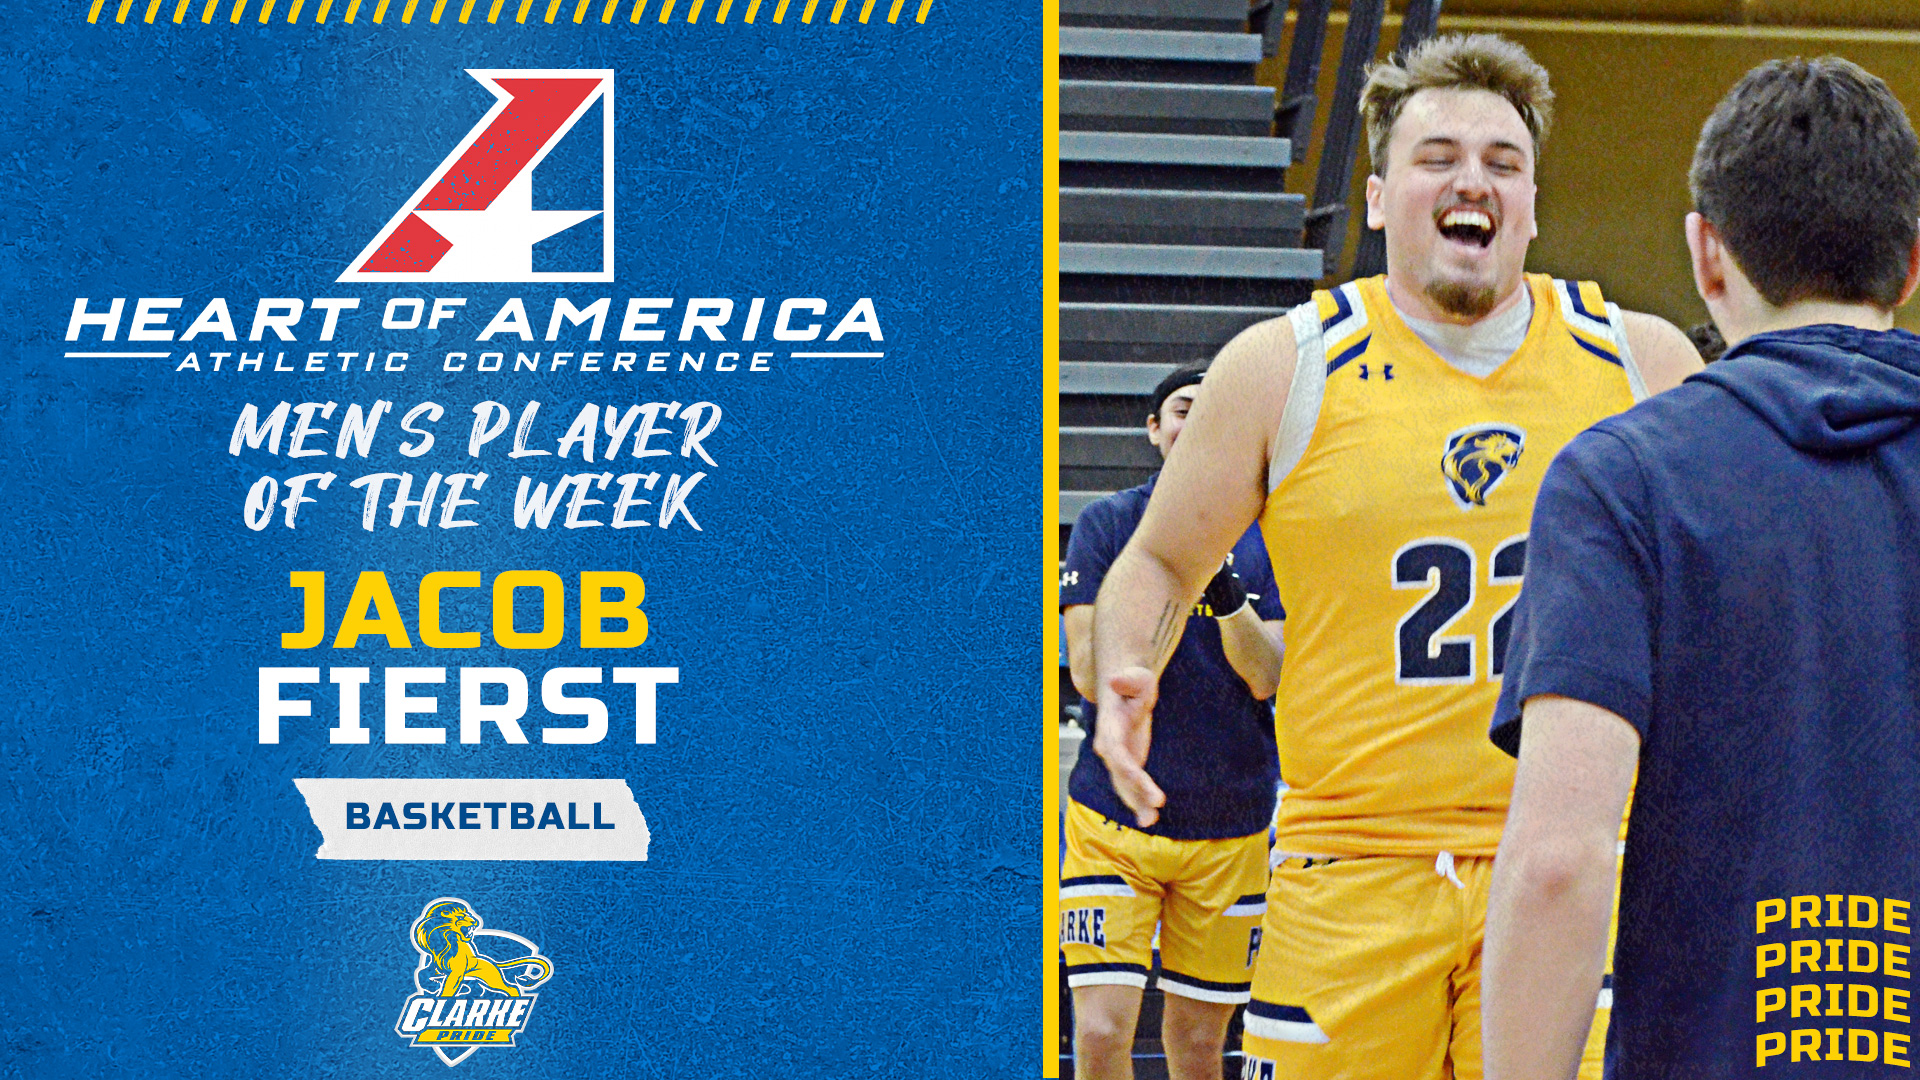 Heart of America Athletic Conference 
Men's Player of the Week
Jacob Fierst
Basketball